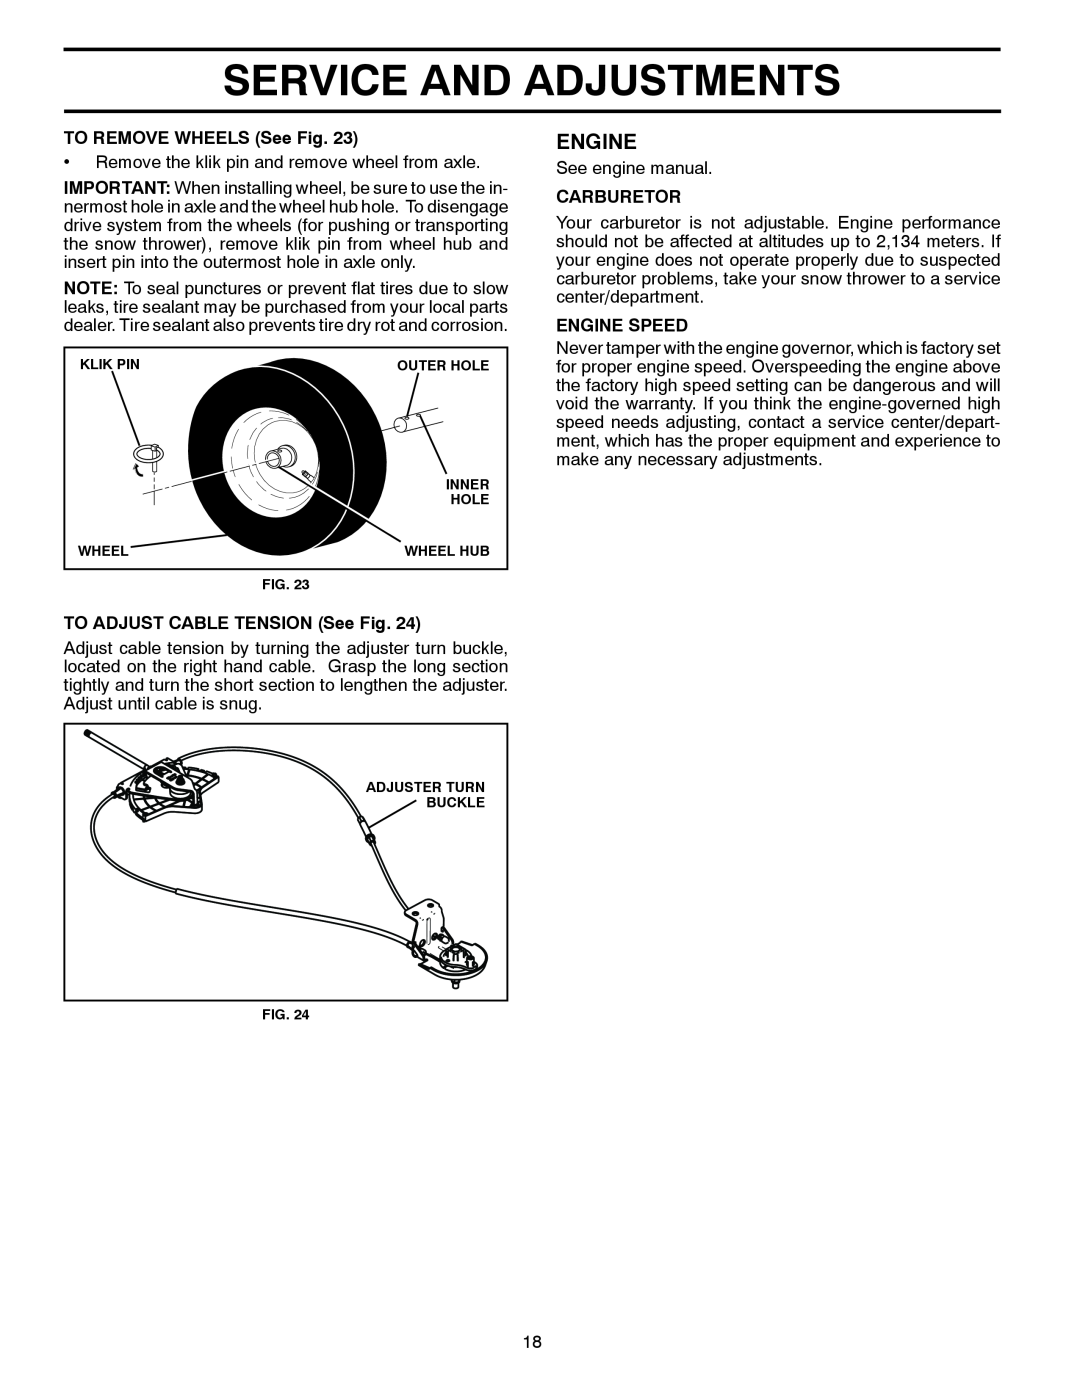 Poulan 435555 Service And Adjustments, Engine, TO REMOVE WHEELS See Fig, TO ADJUST CABLE TENSION See Fig, Carburetor 